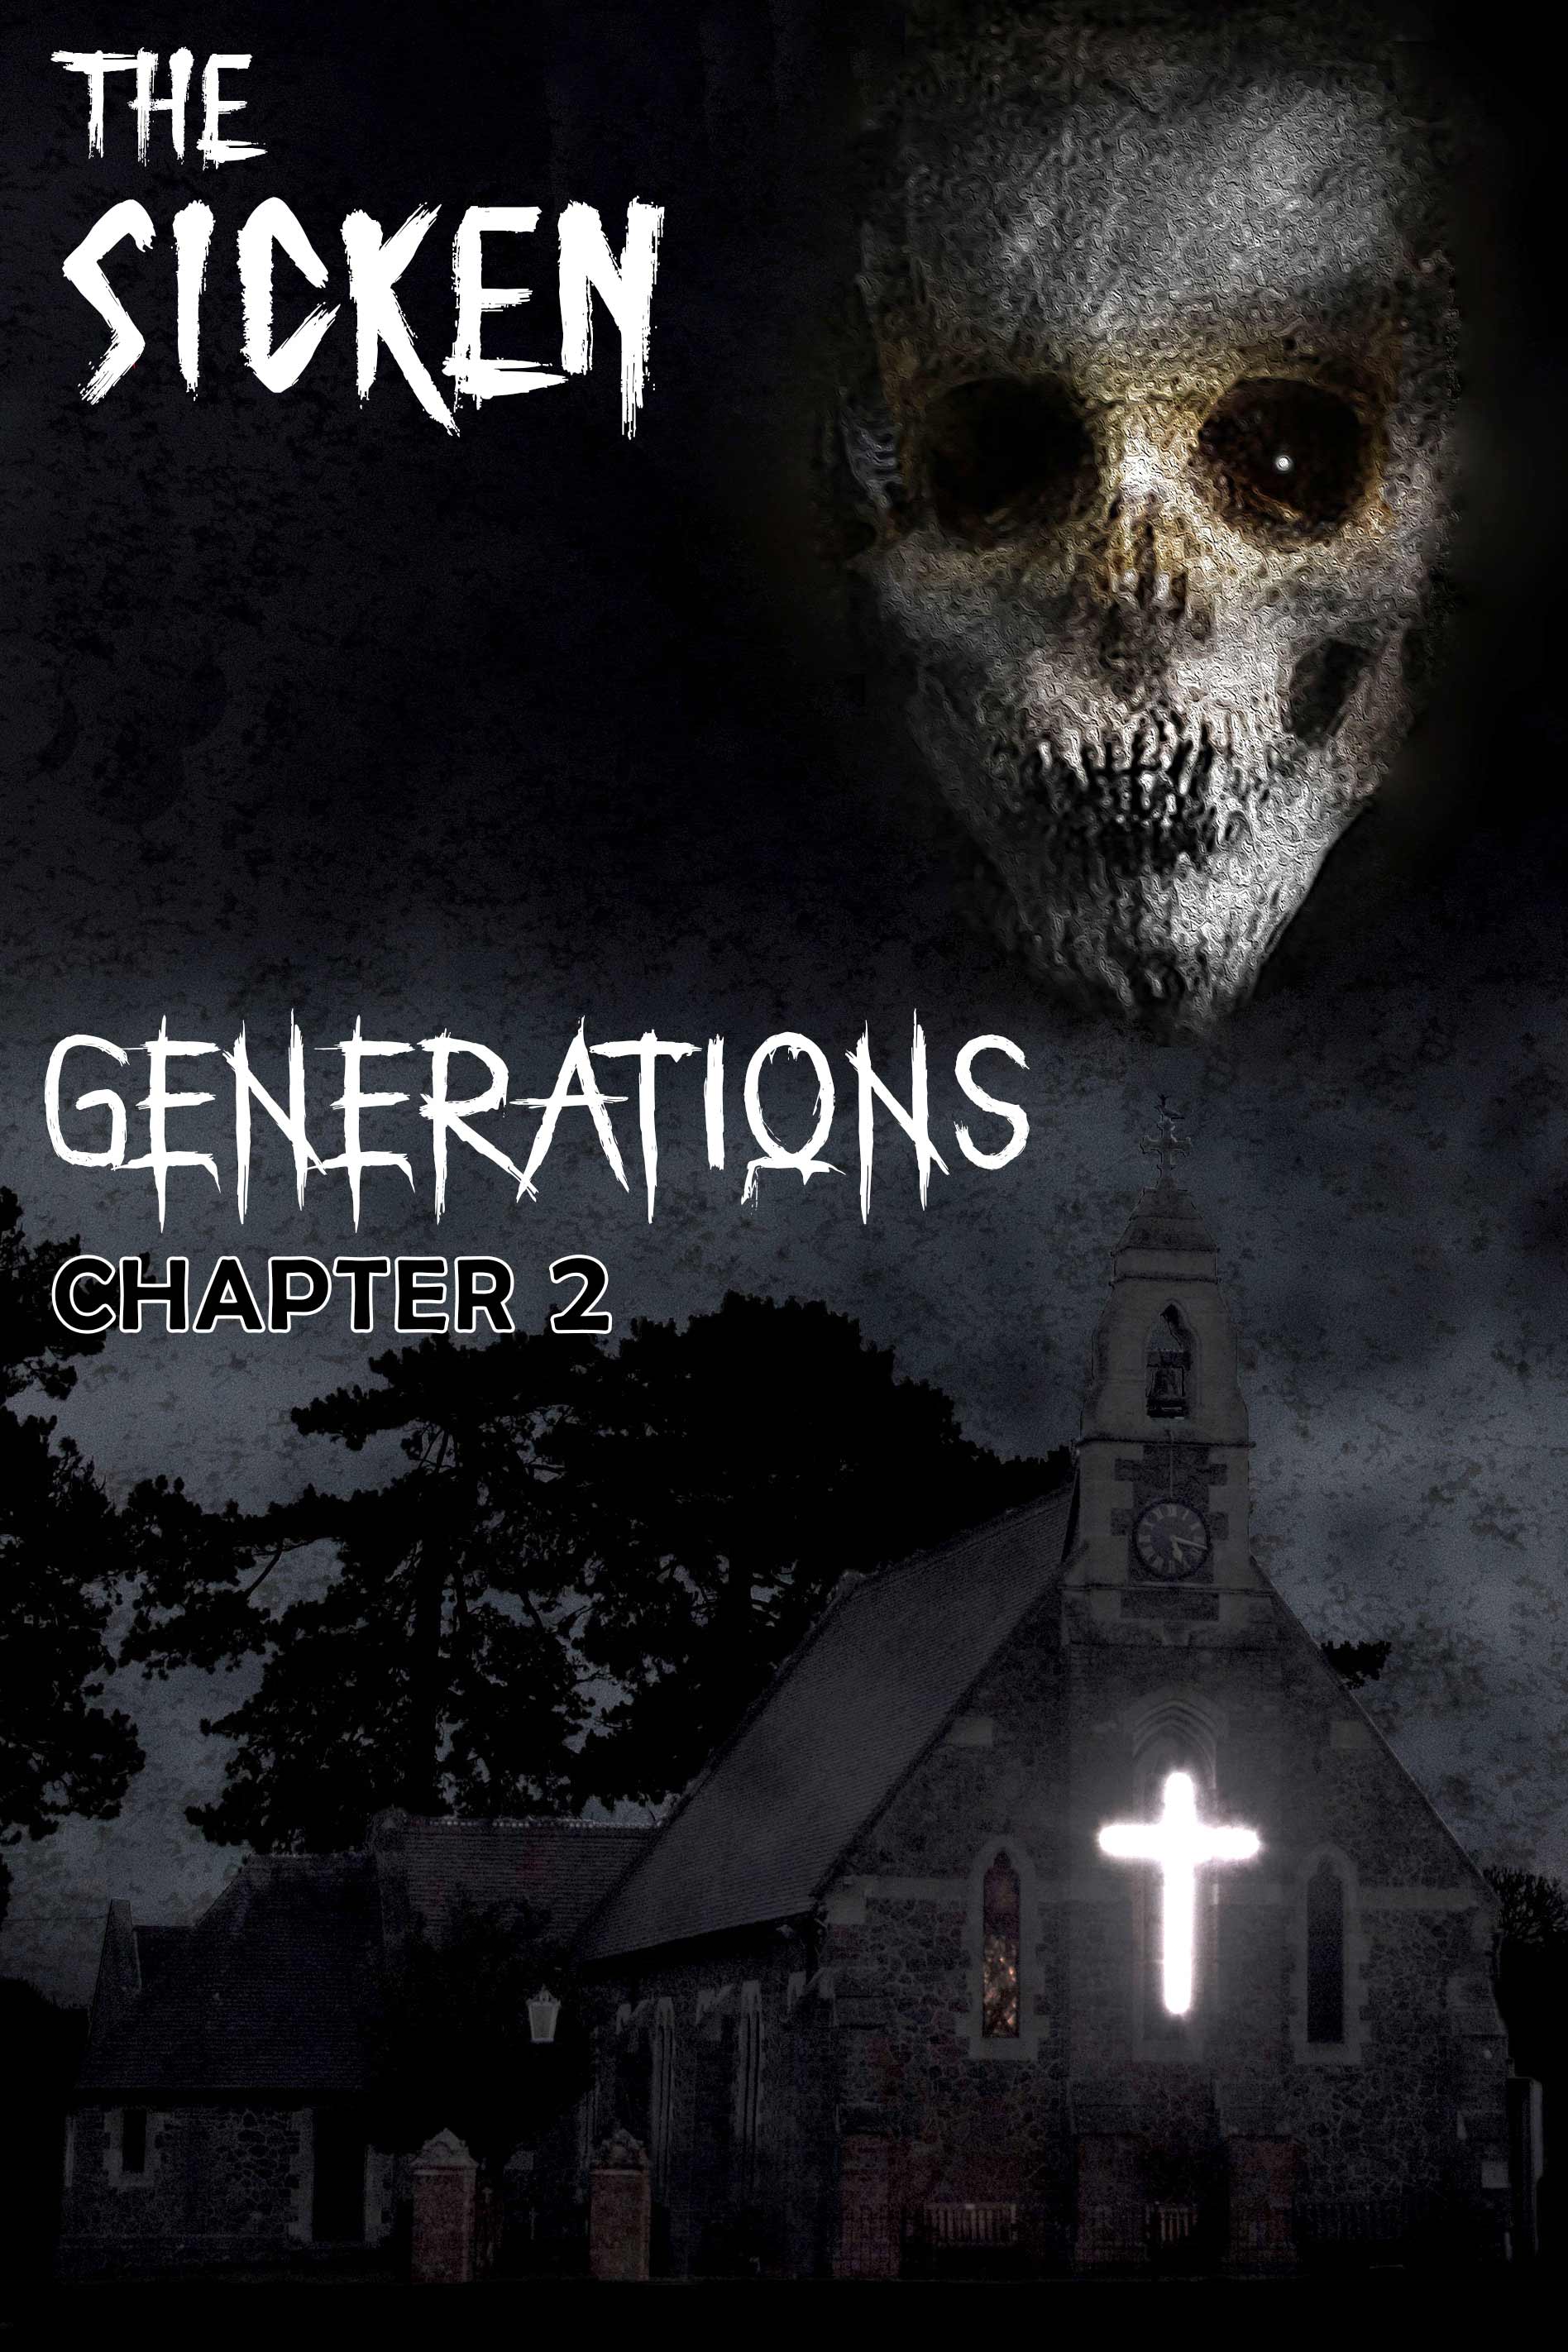 The SICKEN - GERNERATIONS an Award Winning Feature Screenplay by Danny Alex